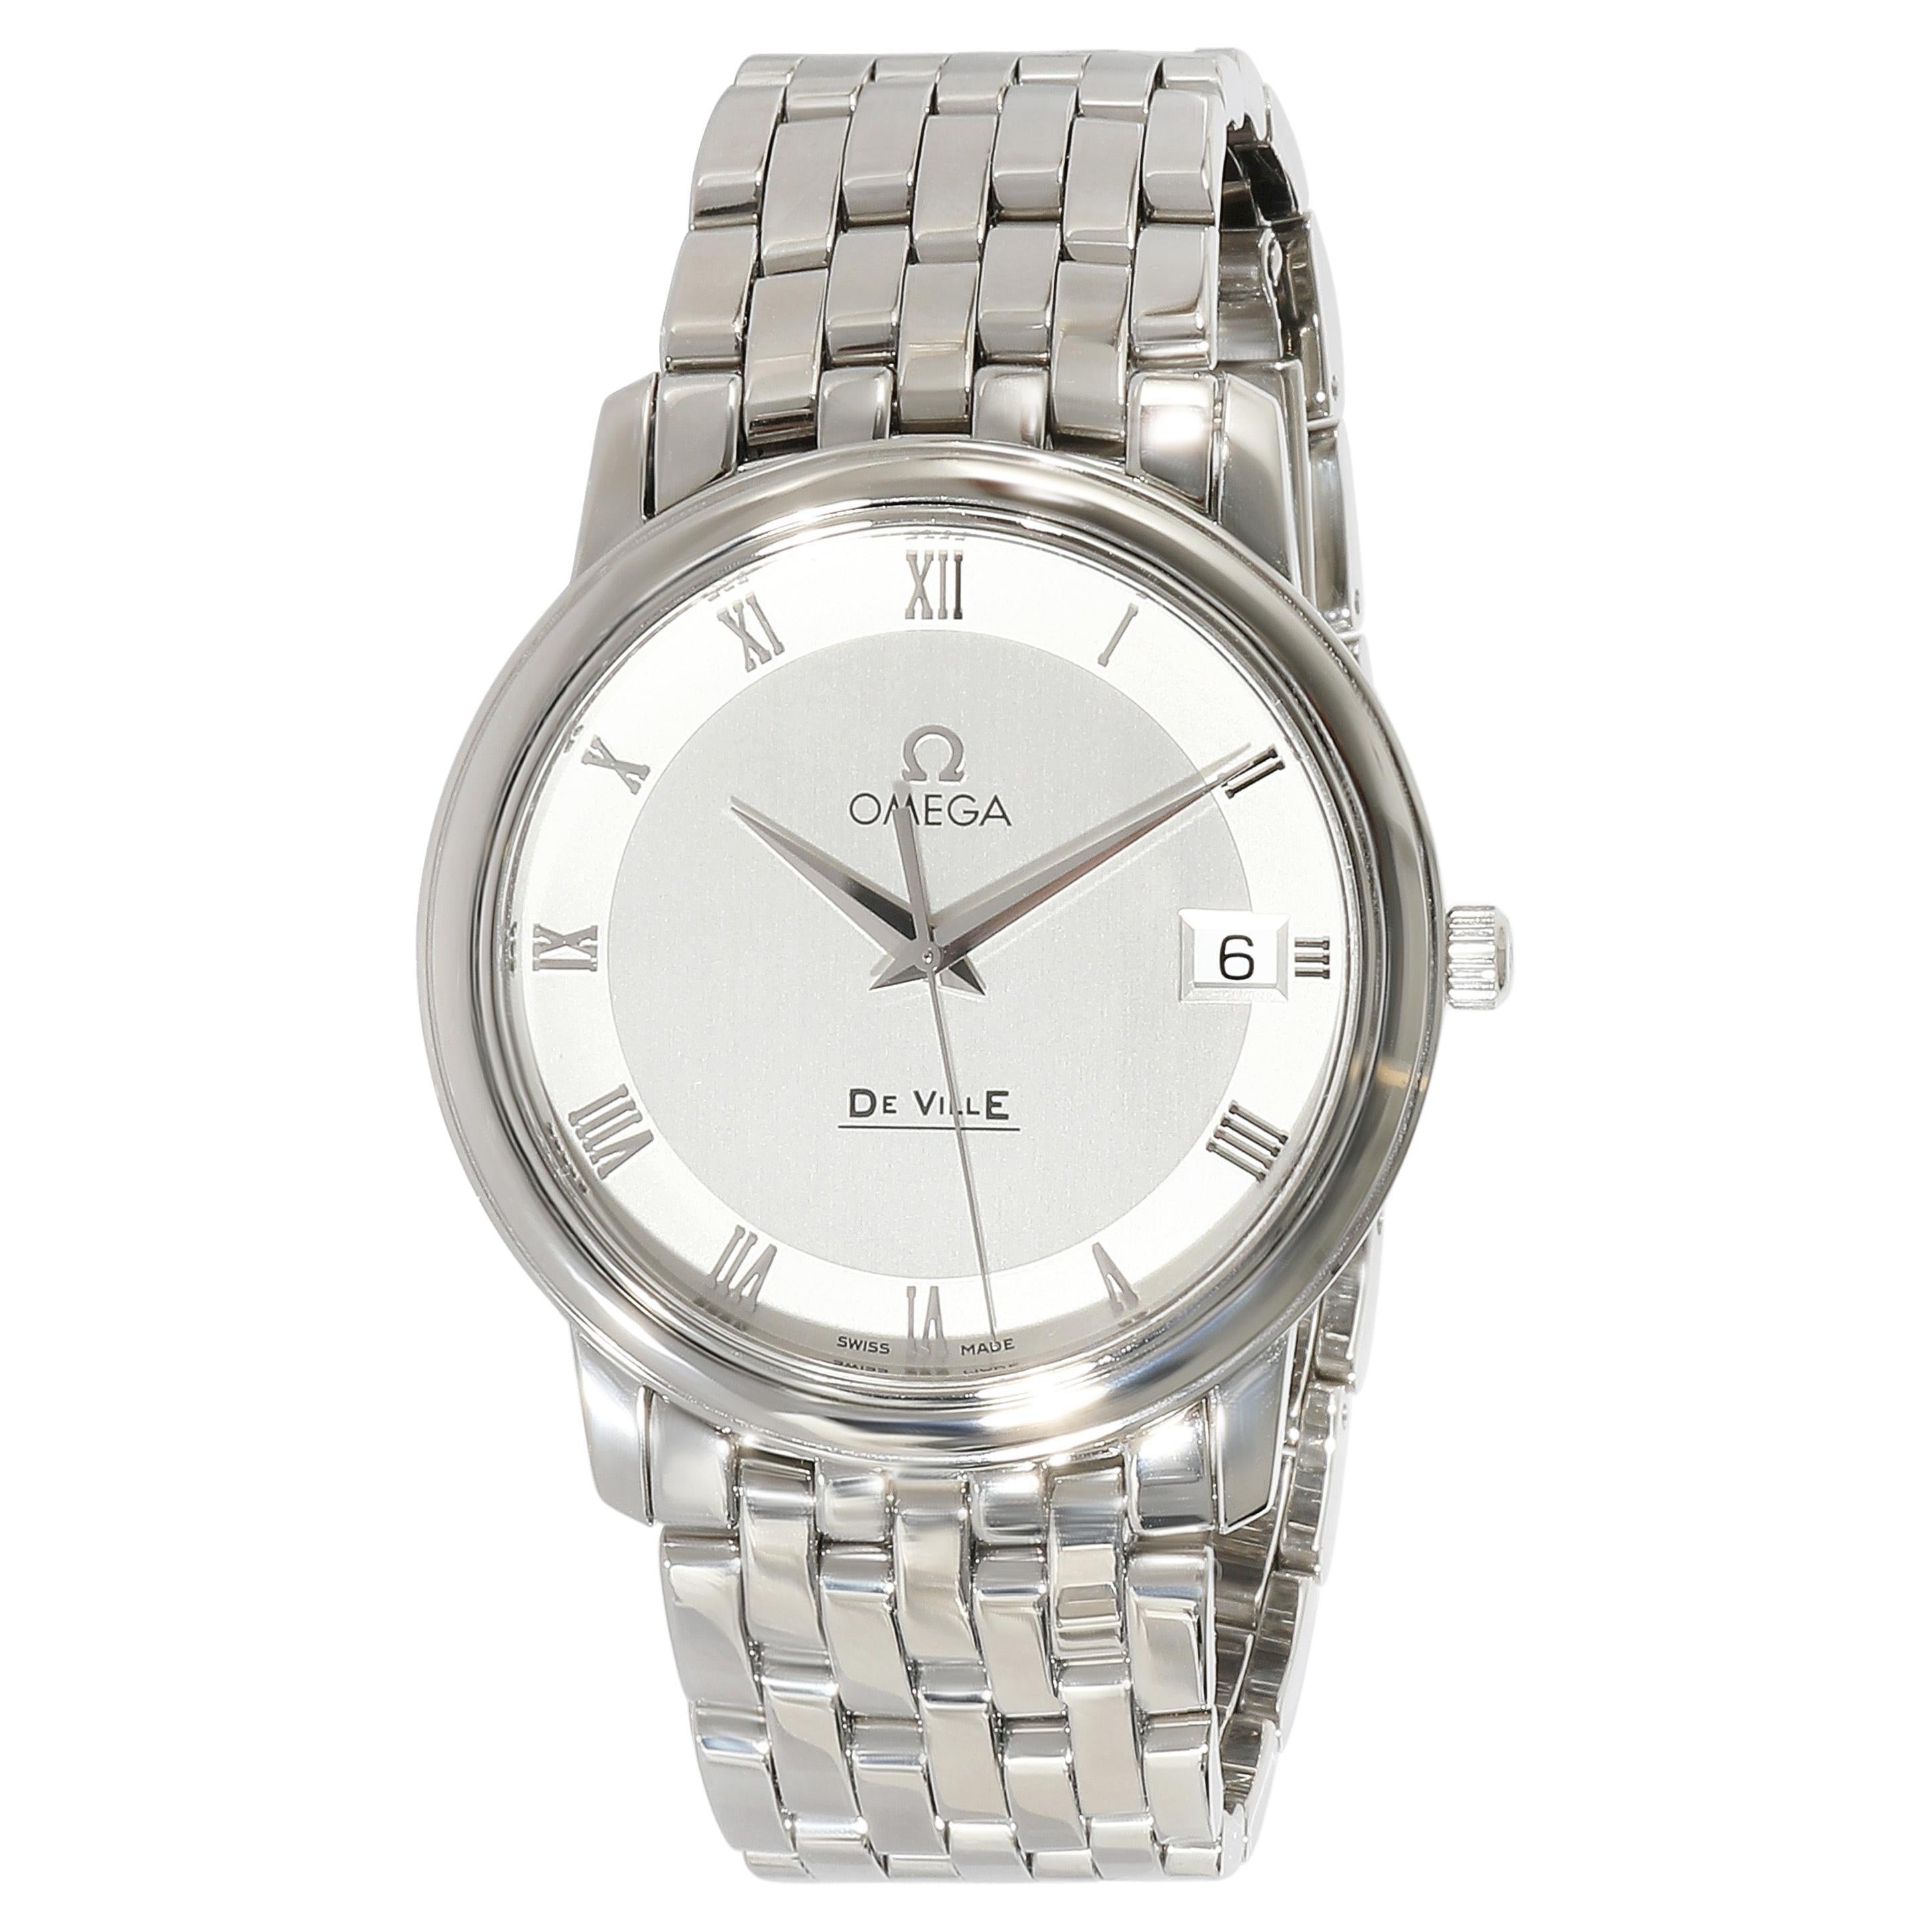 Omega DeVille 4510.33 Unisex Watch in  Stainless Steel